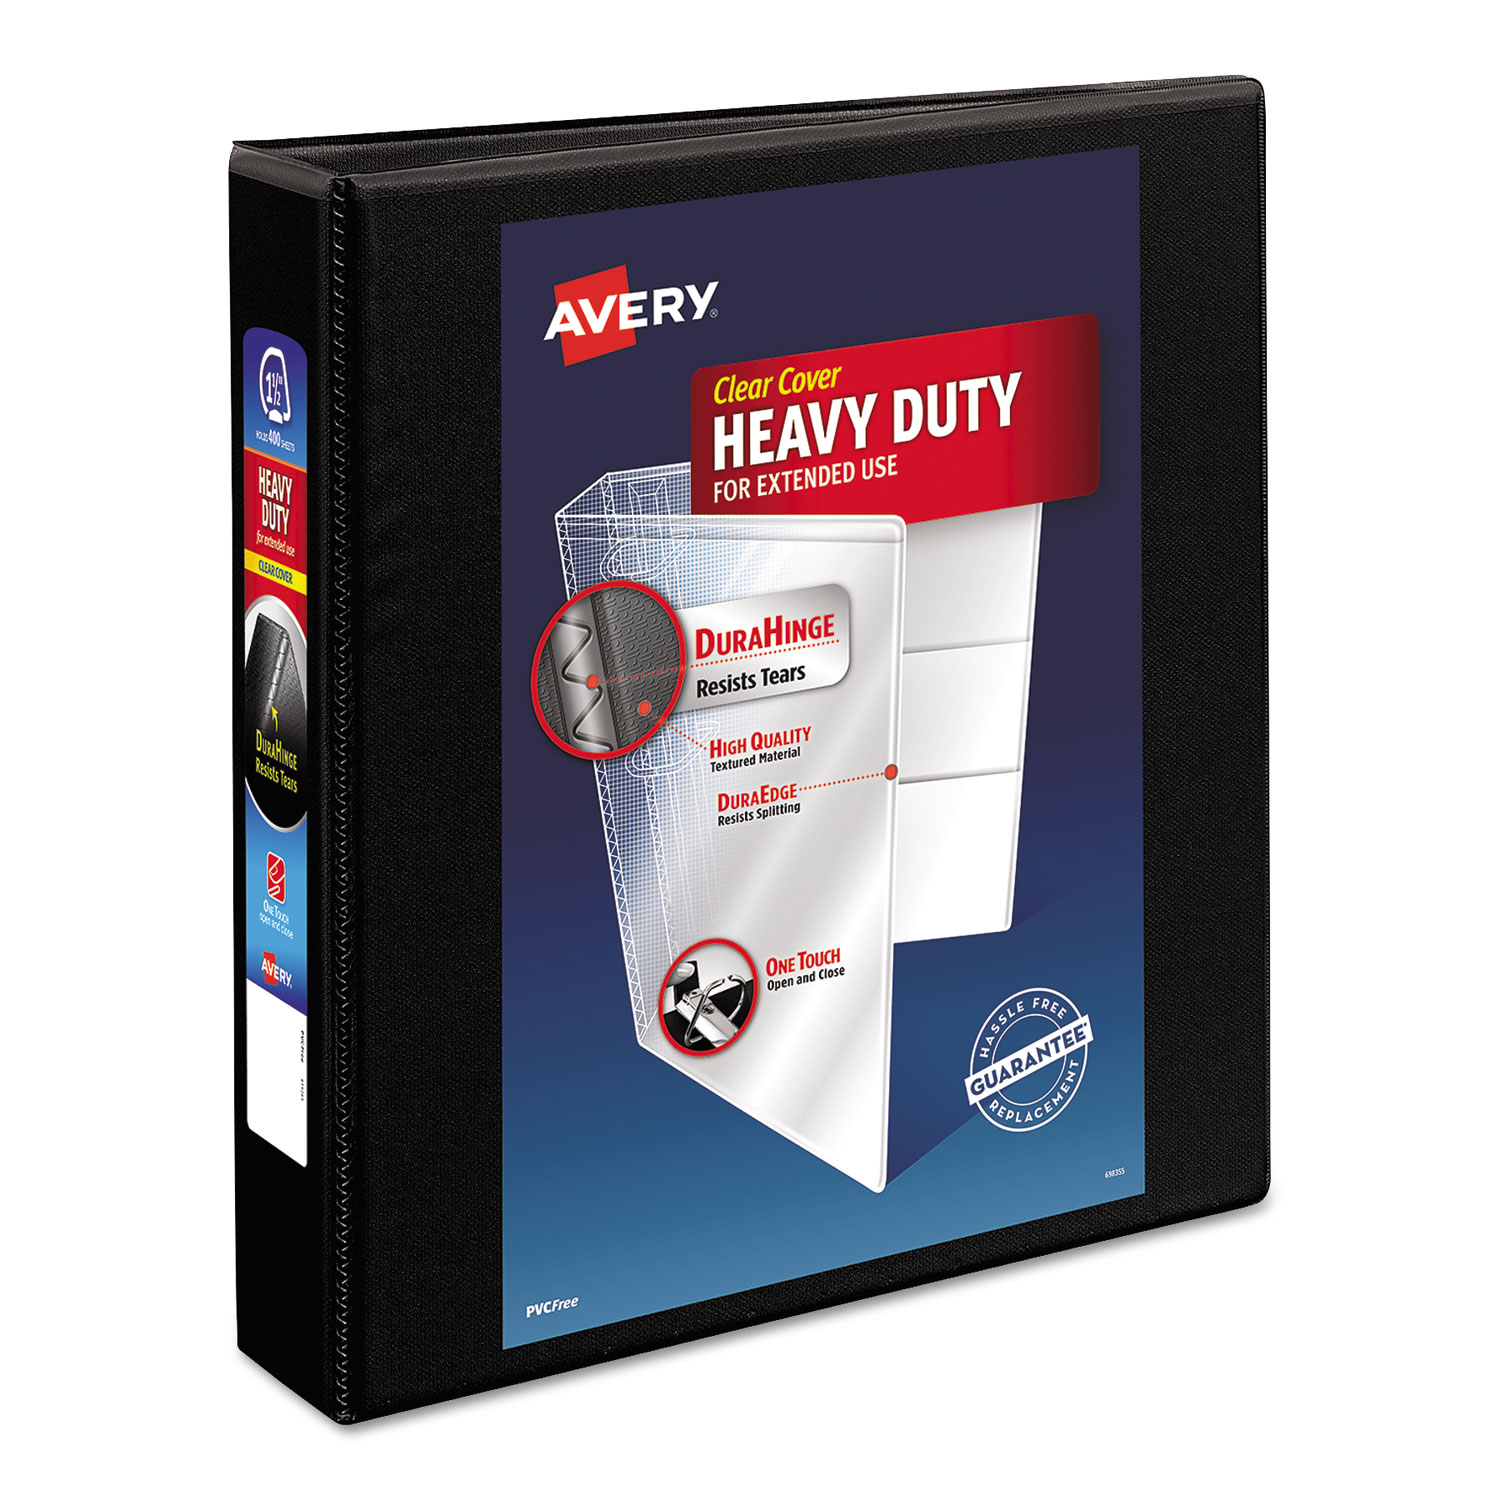  Avery 05400 Heavy-Duty Non Stick View Binder with DuraHinge and Slant Rings, 3 Rings, 1.5 Capacity, 11 x 8.5, Black (AVE05400) 